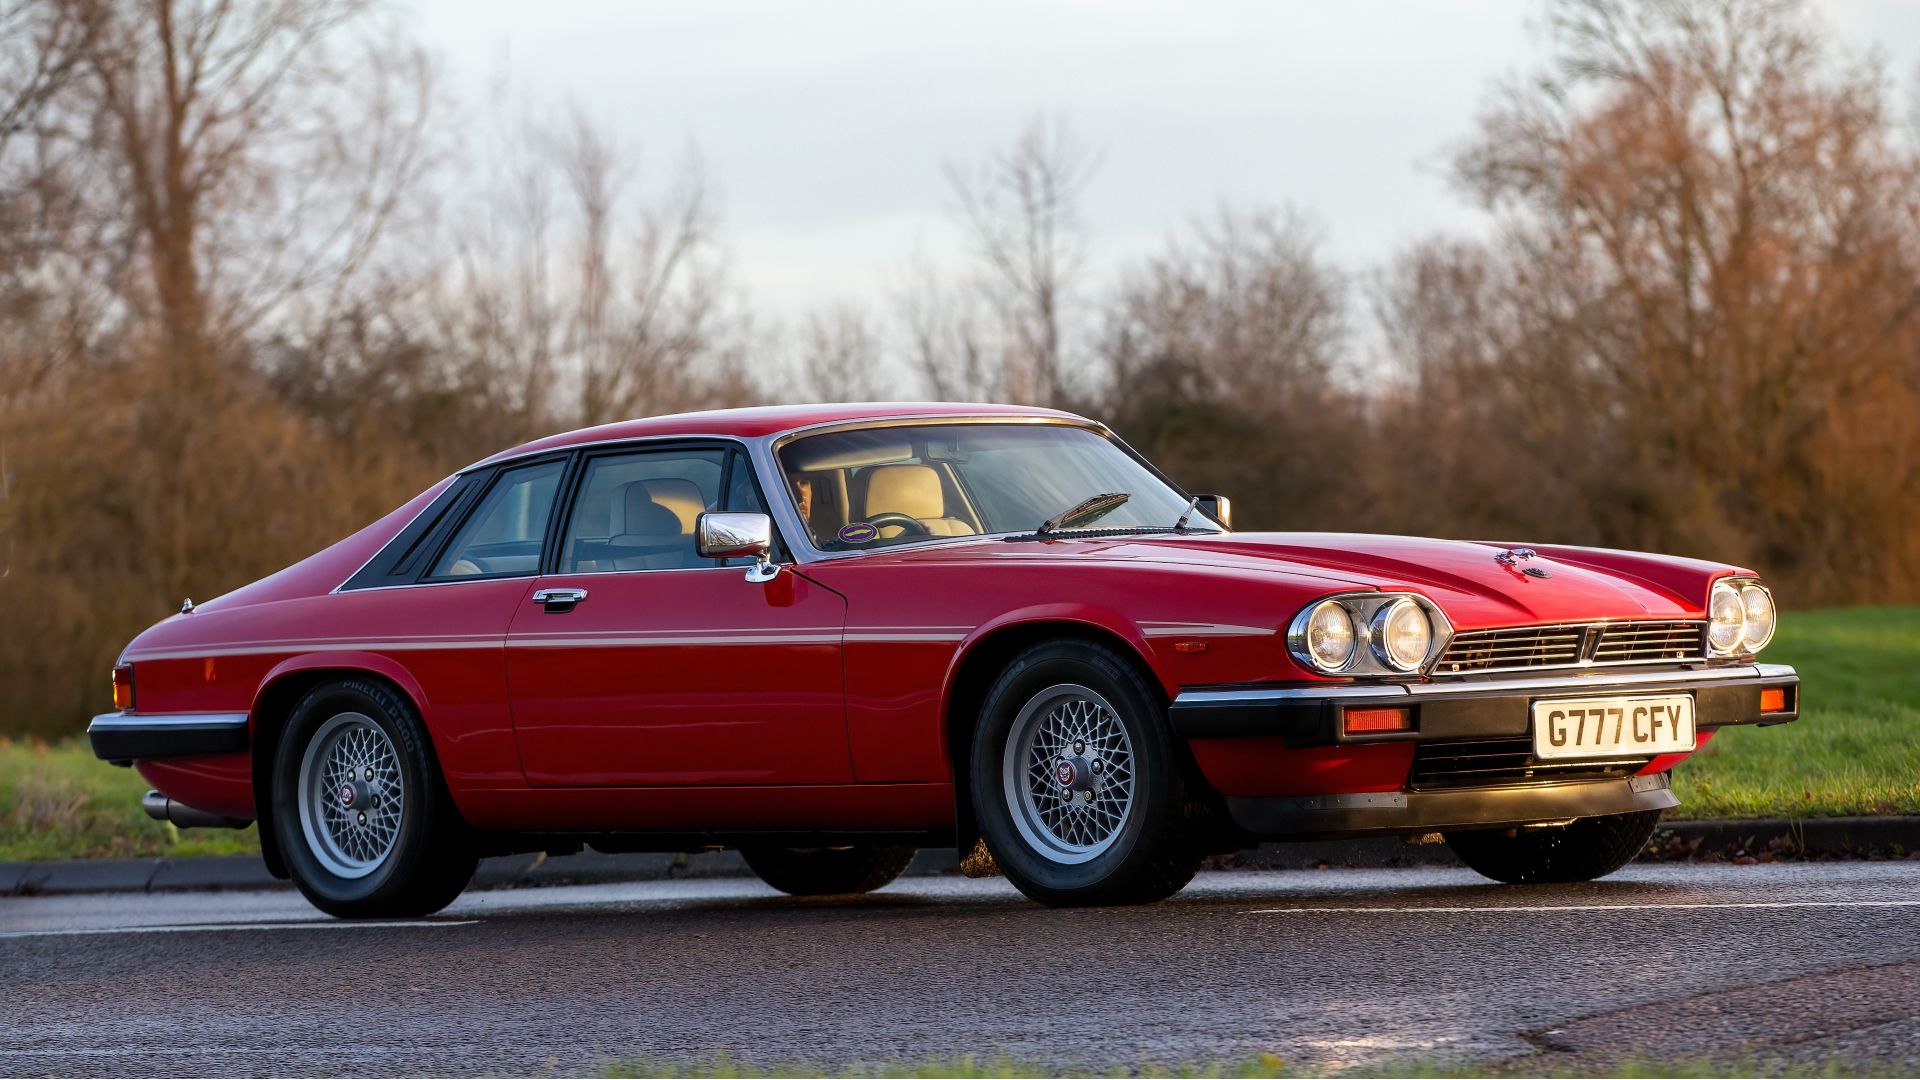 Why The Jaguar XJS Is A Great First Classic Car